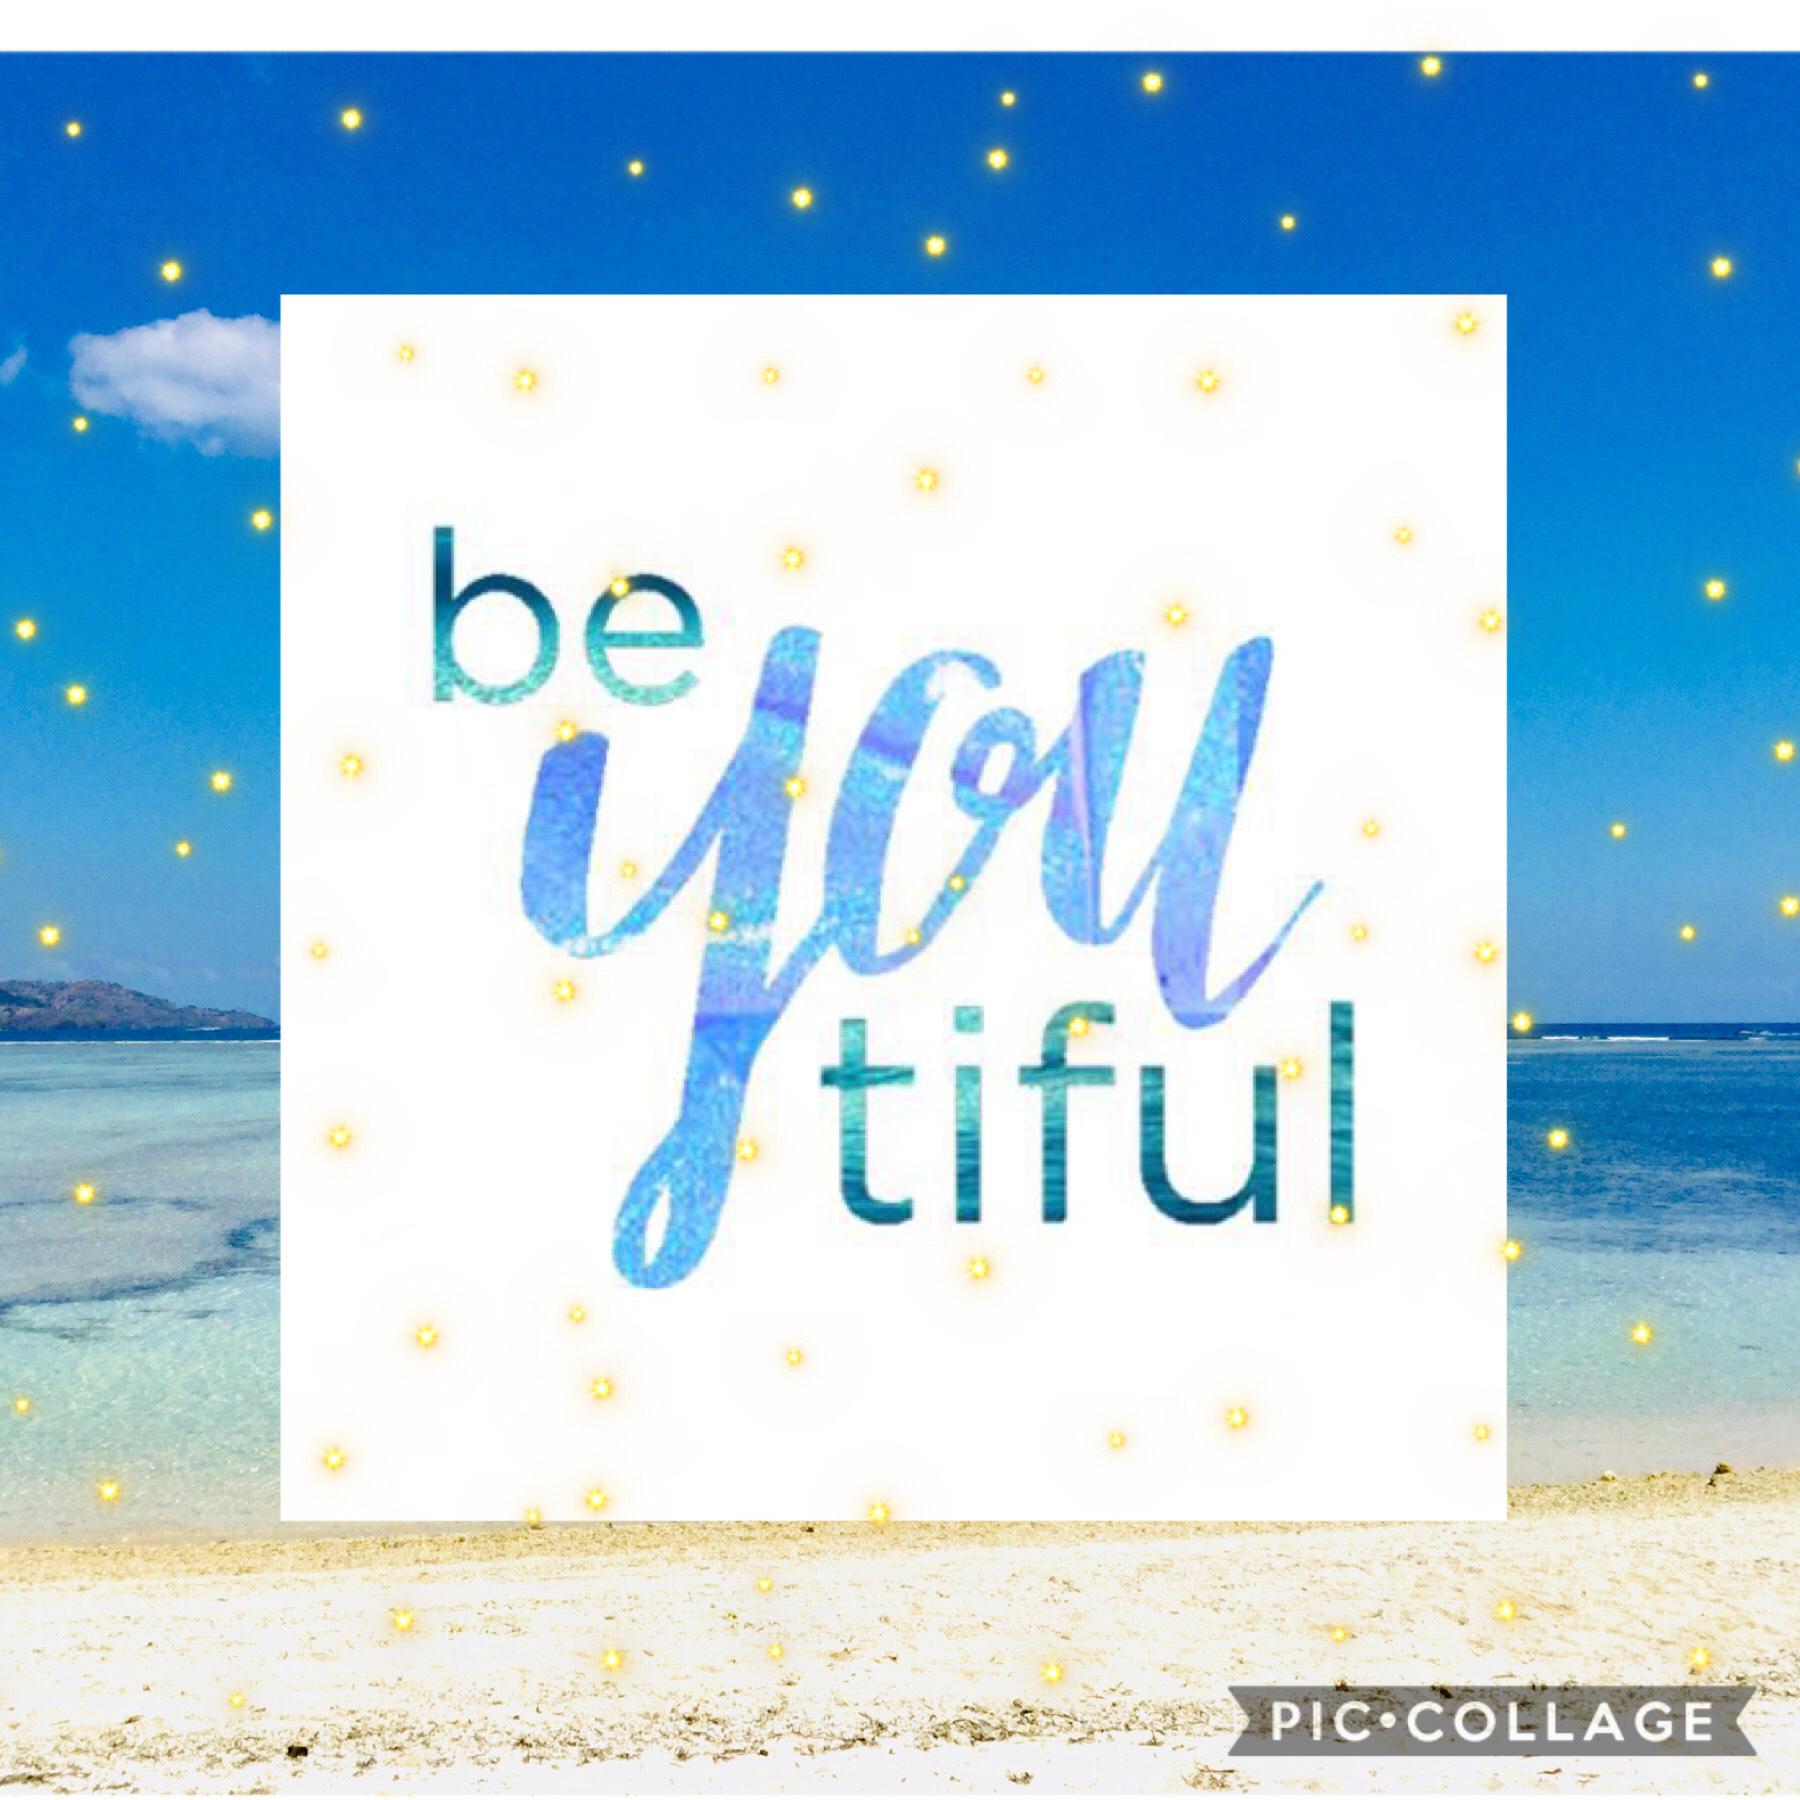 “Be your own kind of beautiful” #beautiful #you #be #beach #stars #blue